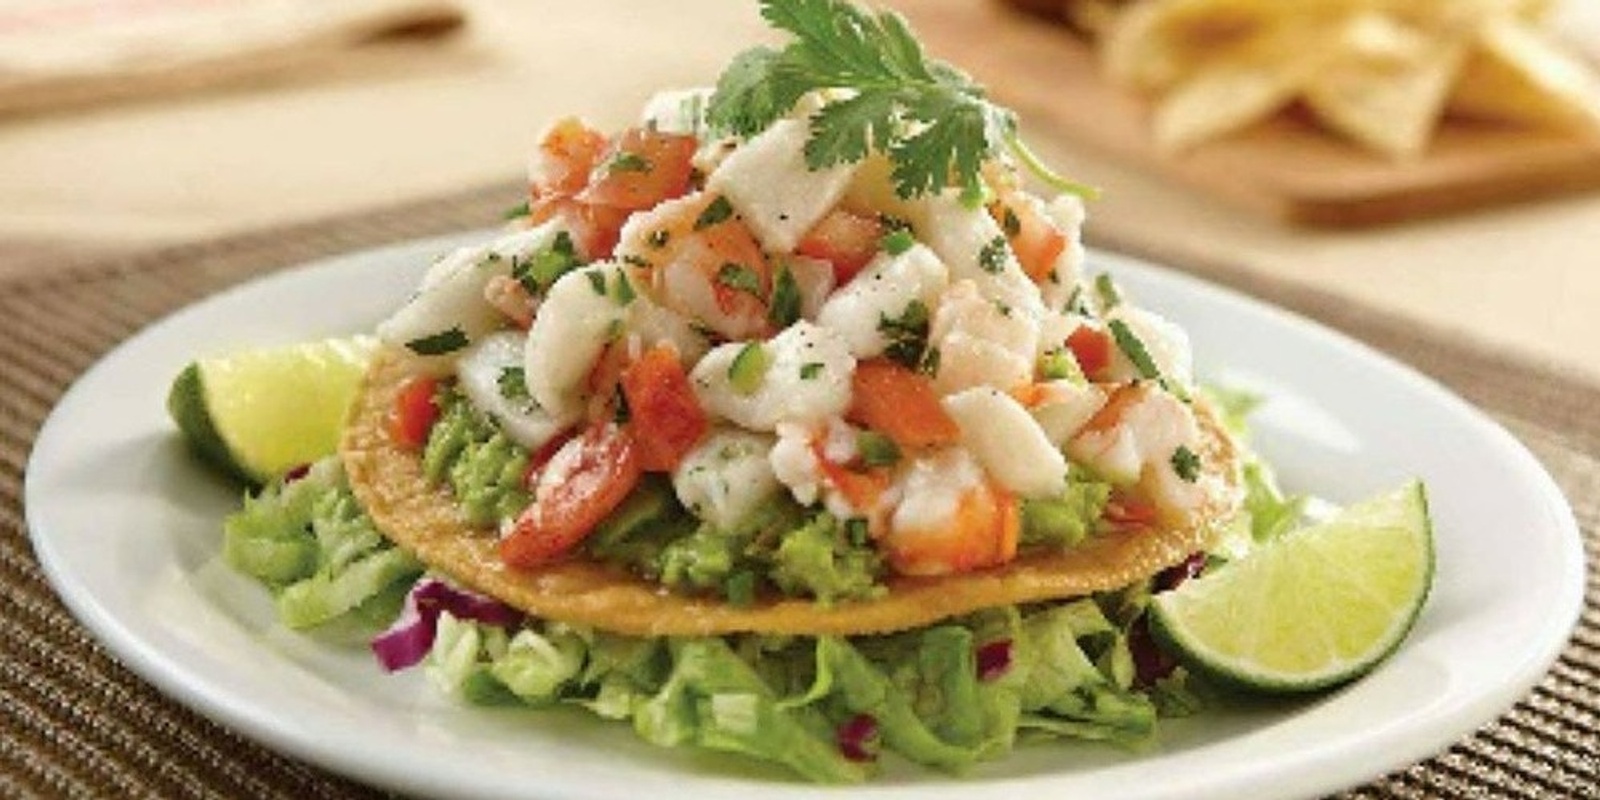 Authentic Mexican Cooking Class & Cultural Exchange Sydney- Ceviche & Fish tacos